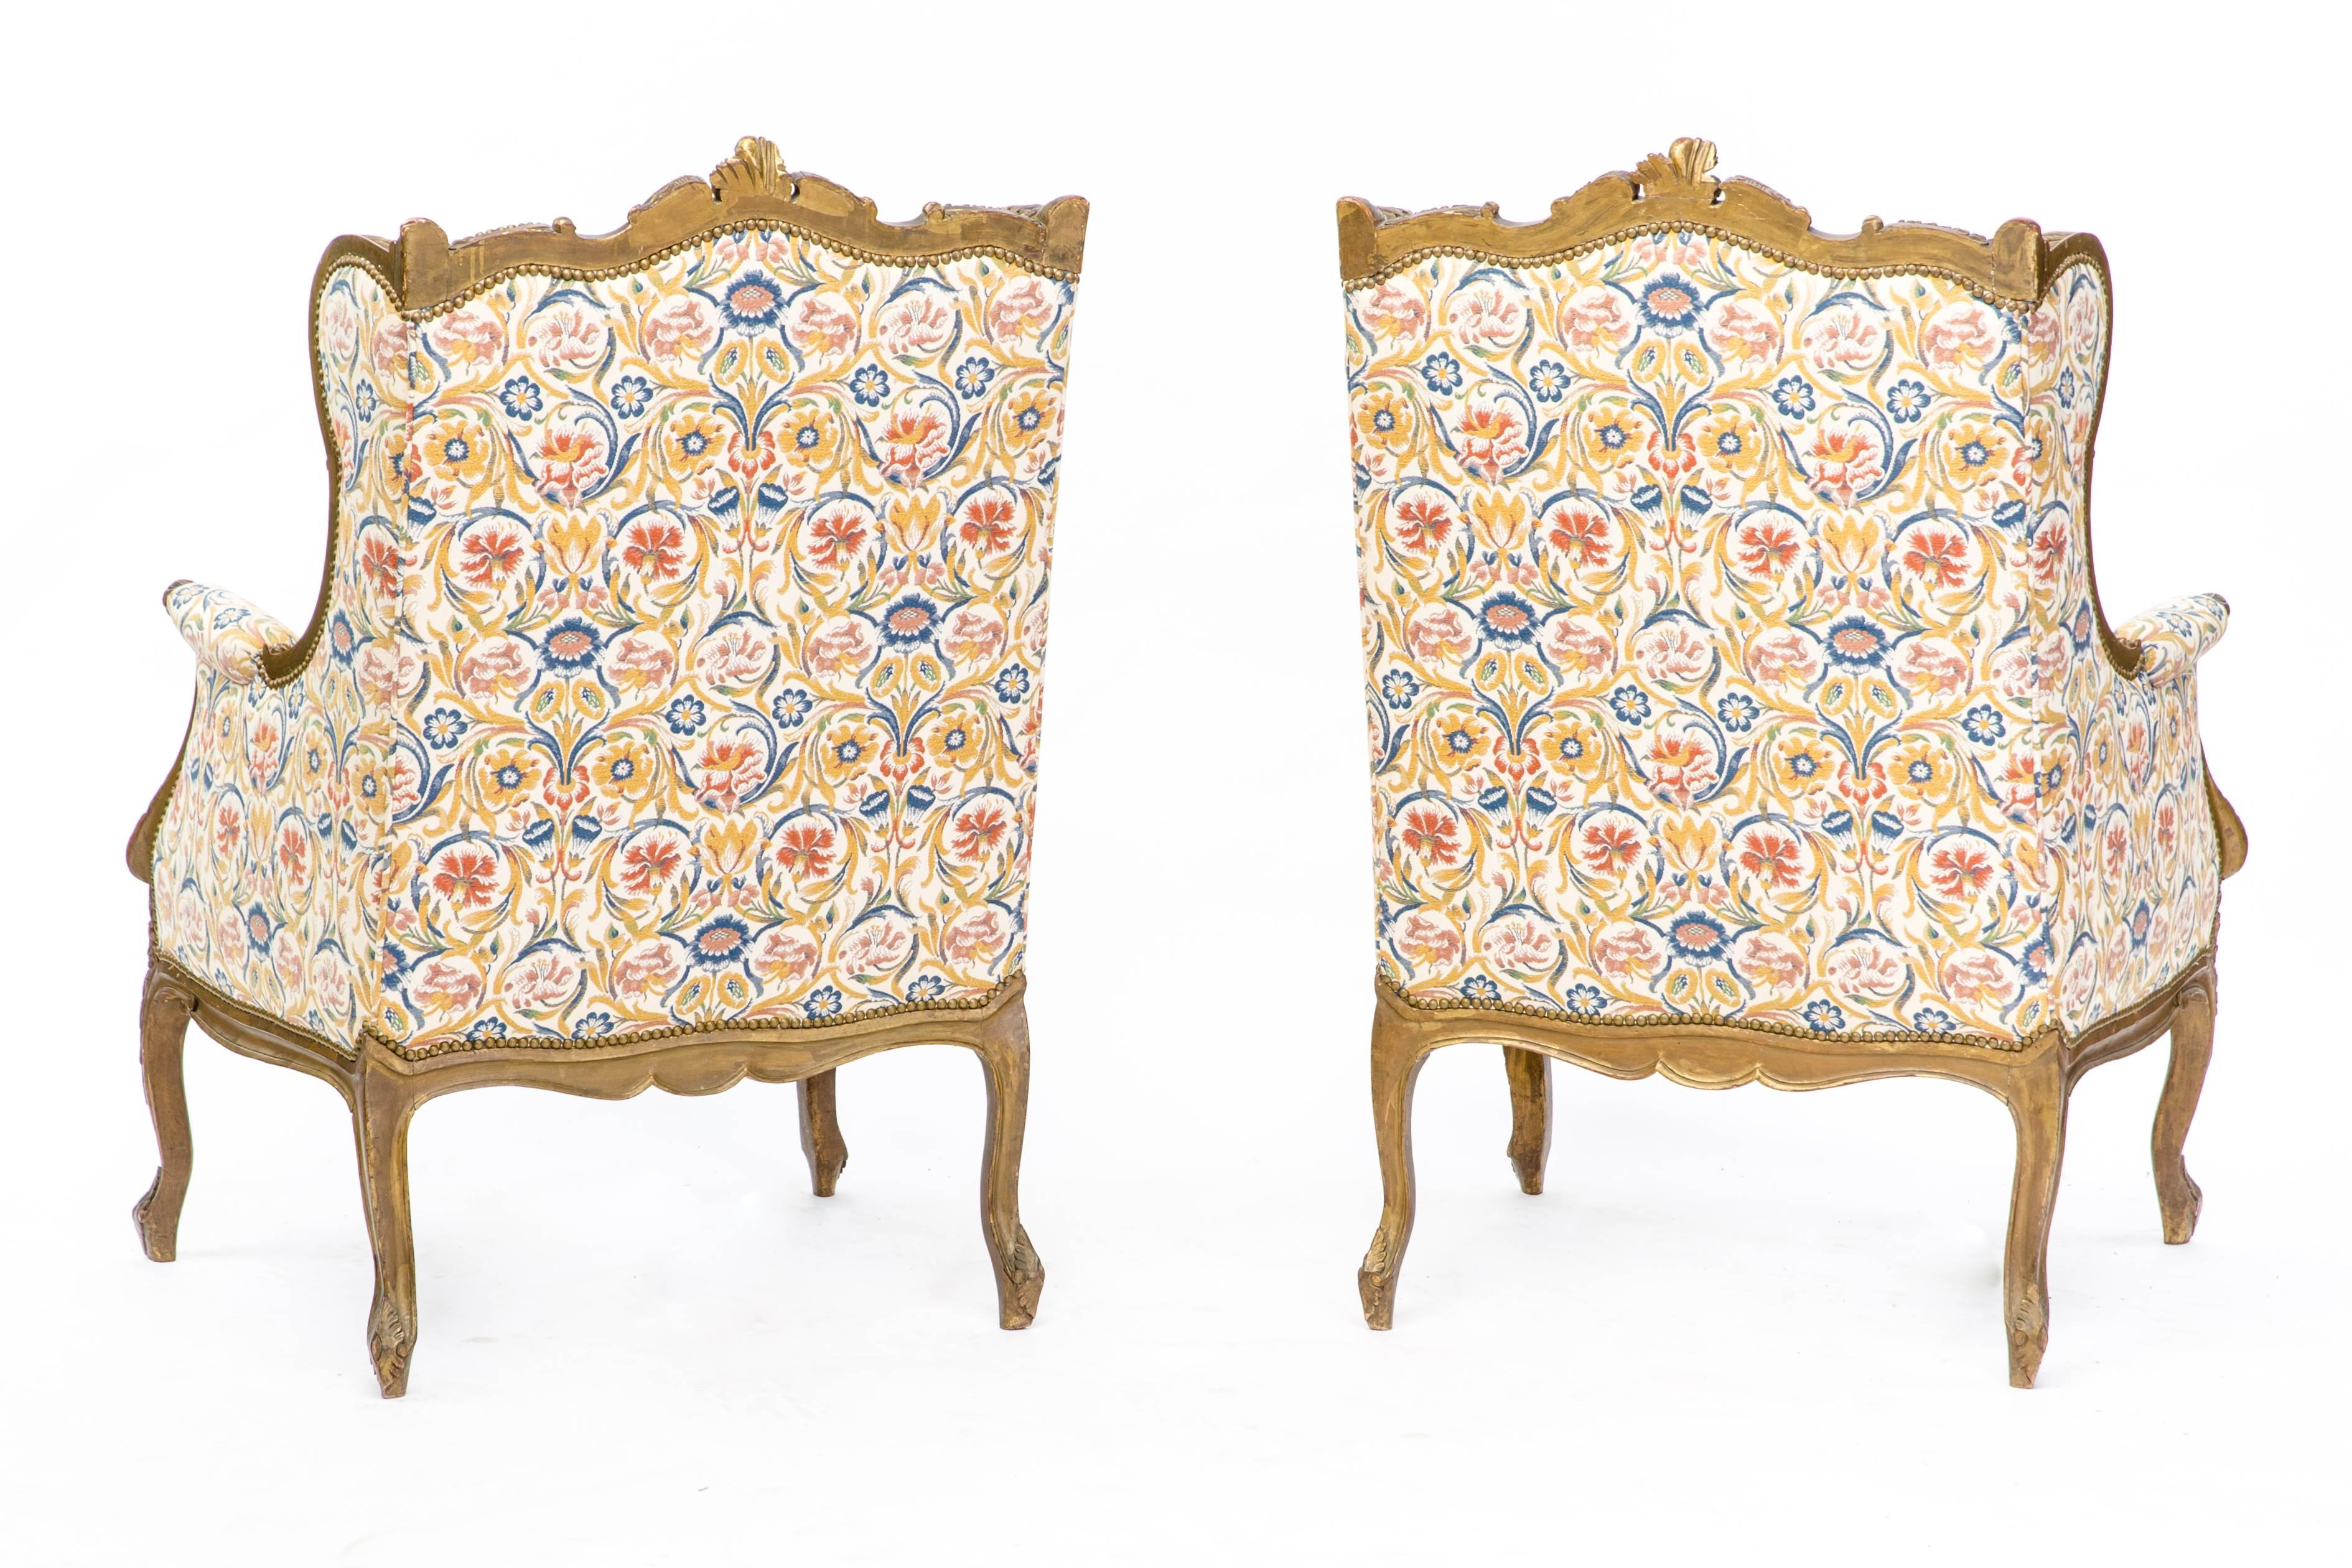 A stunning pair of 19th century Louis XV style French wingback armchairs upholstered in luxurious floral pattern, circa 1870. This piece is made of heavily carved walnut with a gold finish. Both of the items are in excellent condition.